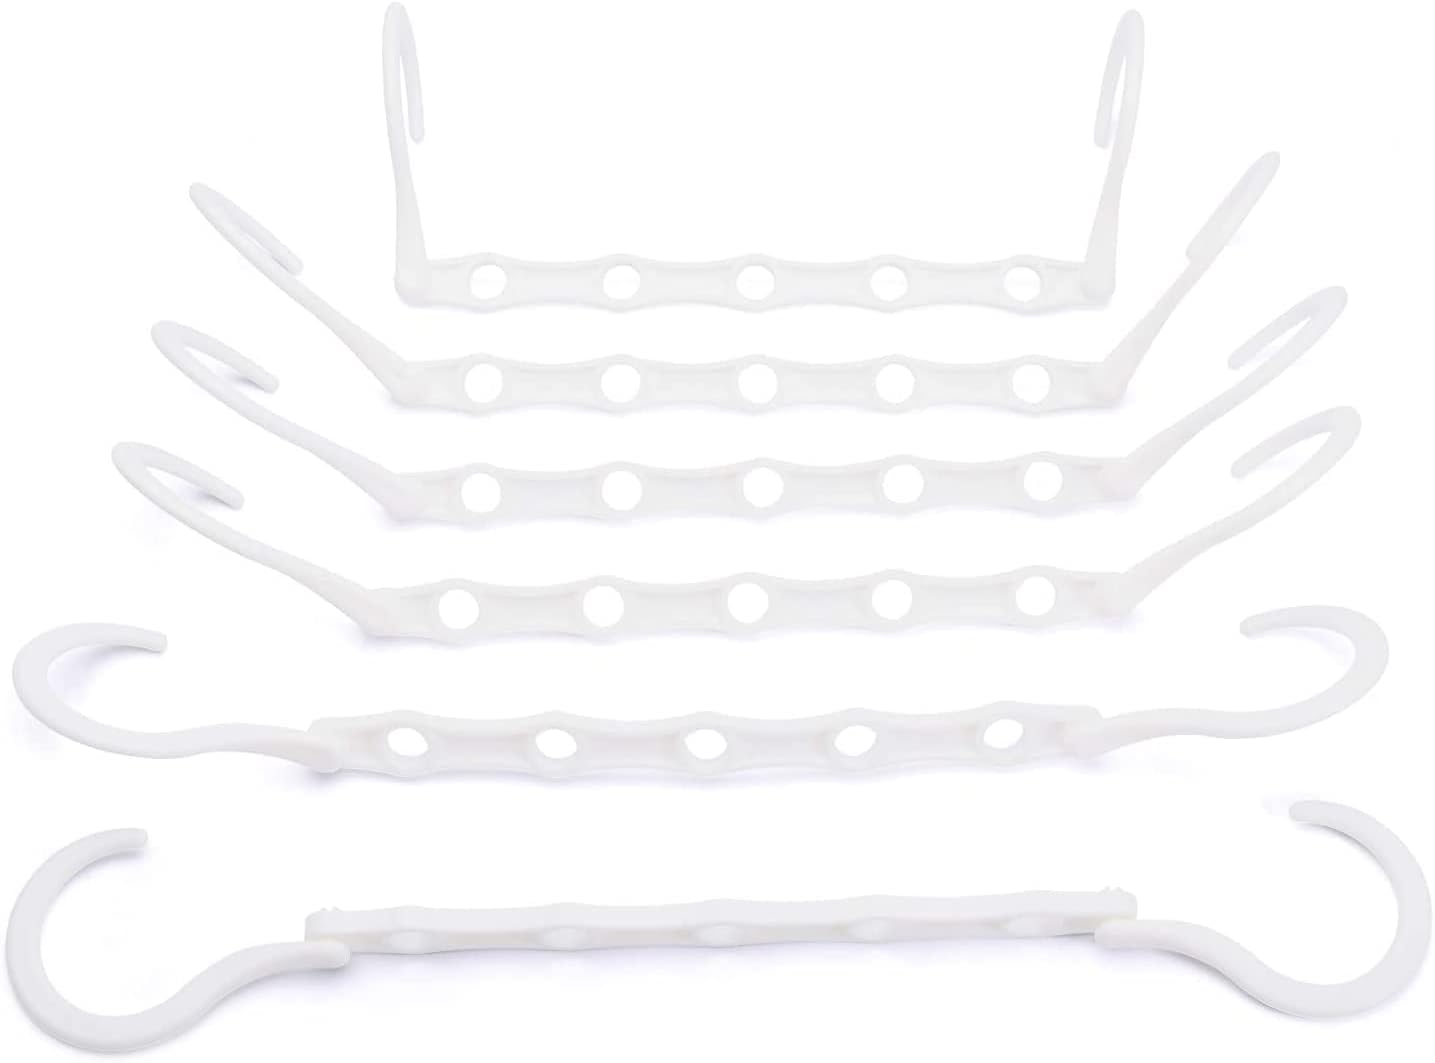 HOUSE DAY 15 Inch Plastic Hangers Space Saving Organizers 20 Pack